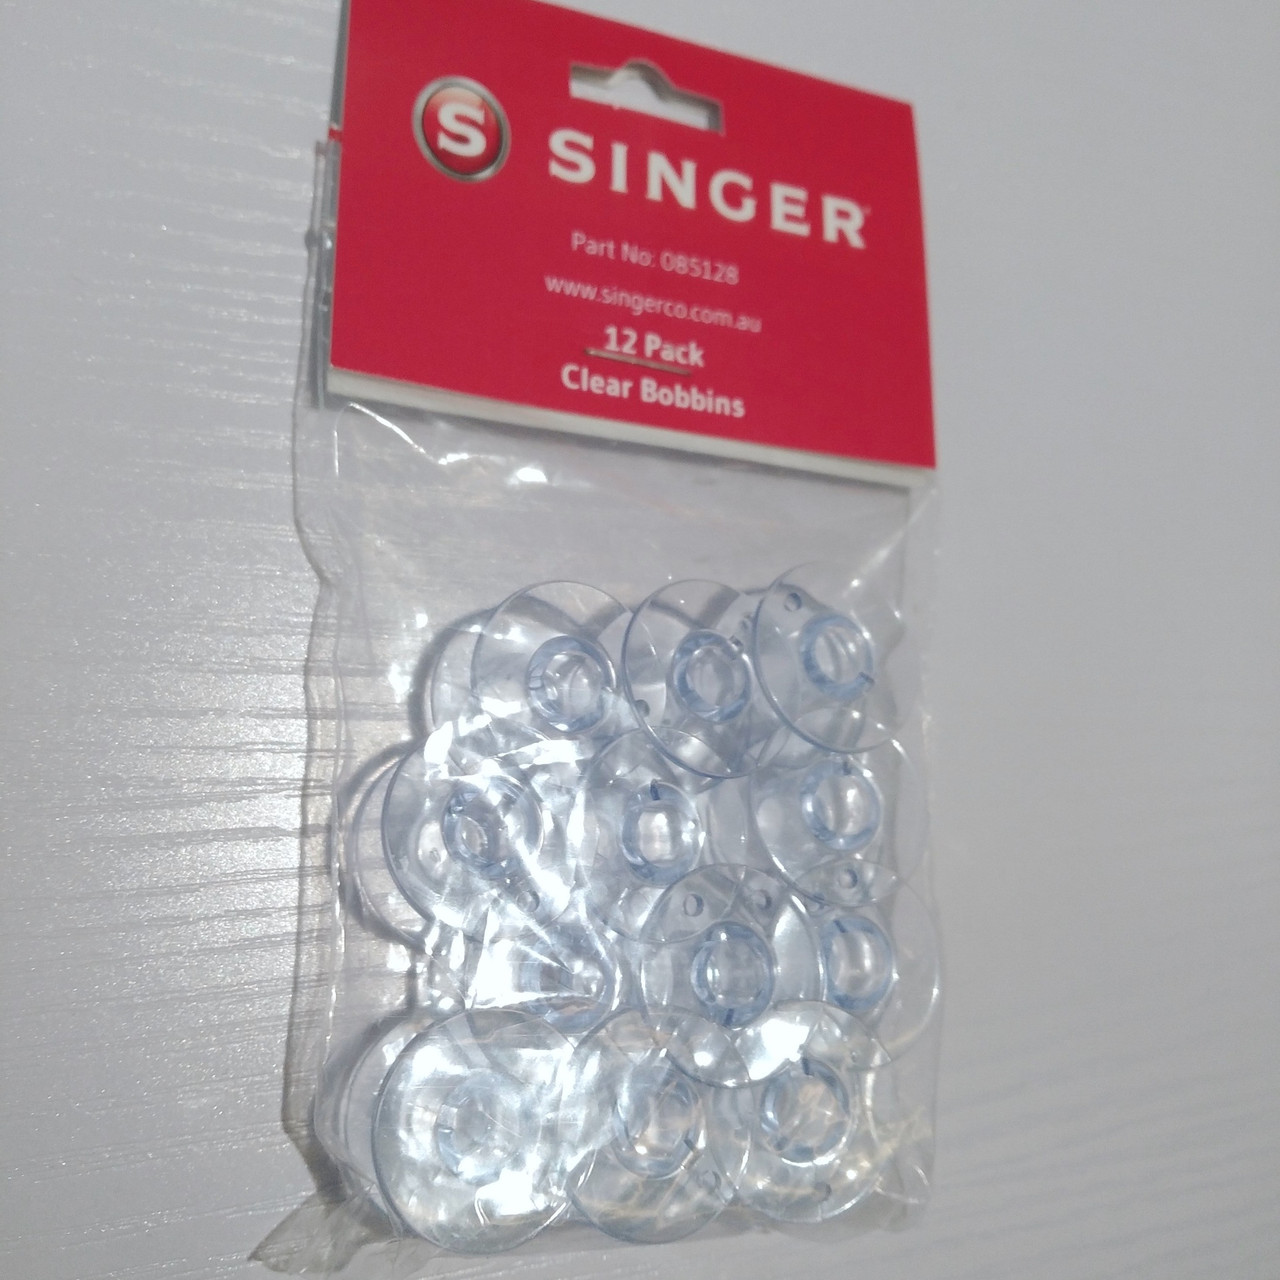 Singer: 12 pack Clear Bobbins - Wellington Sewing Centre